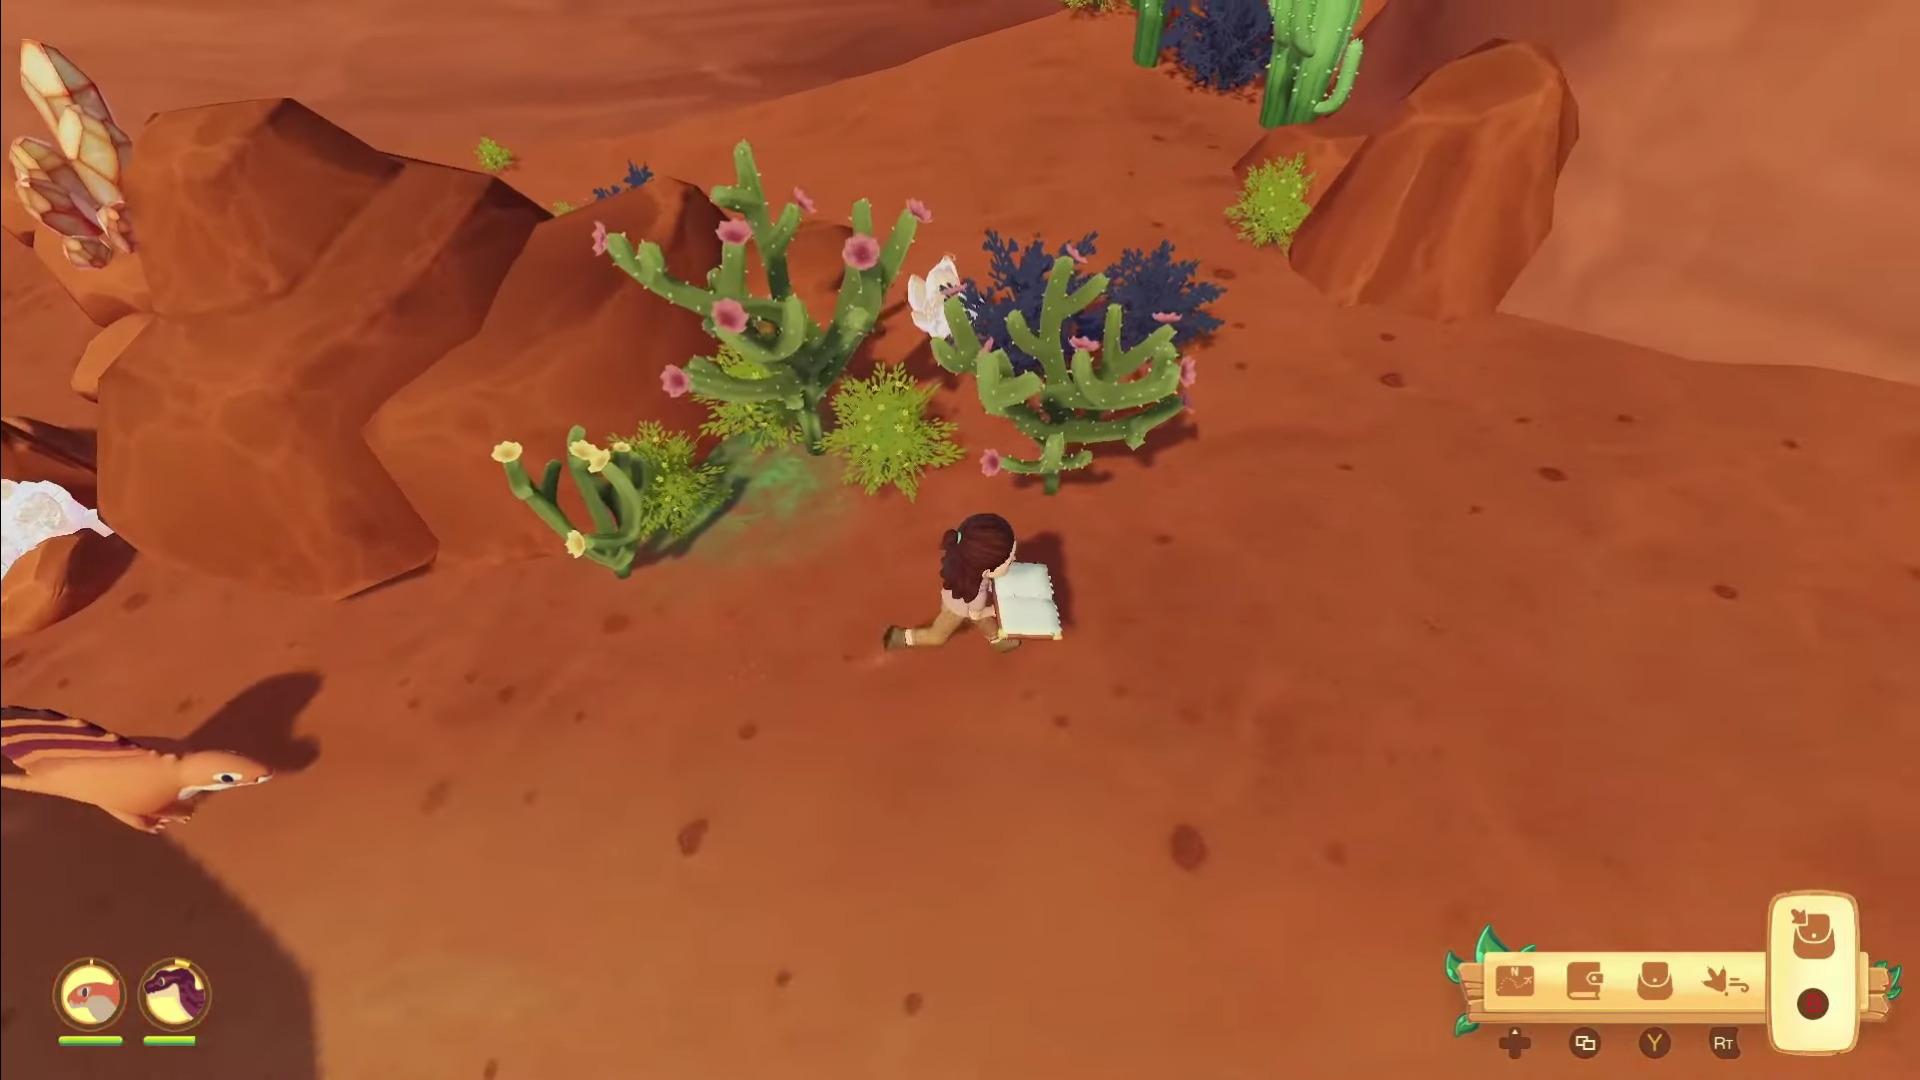 A screenshot of Youtuber "Jynn" locating a Dreamstone at Ariacotta Canyon in Paleo Pines.